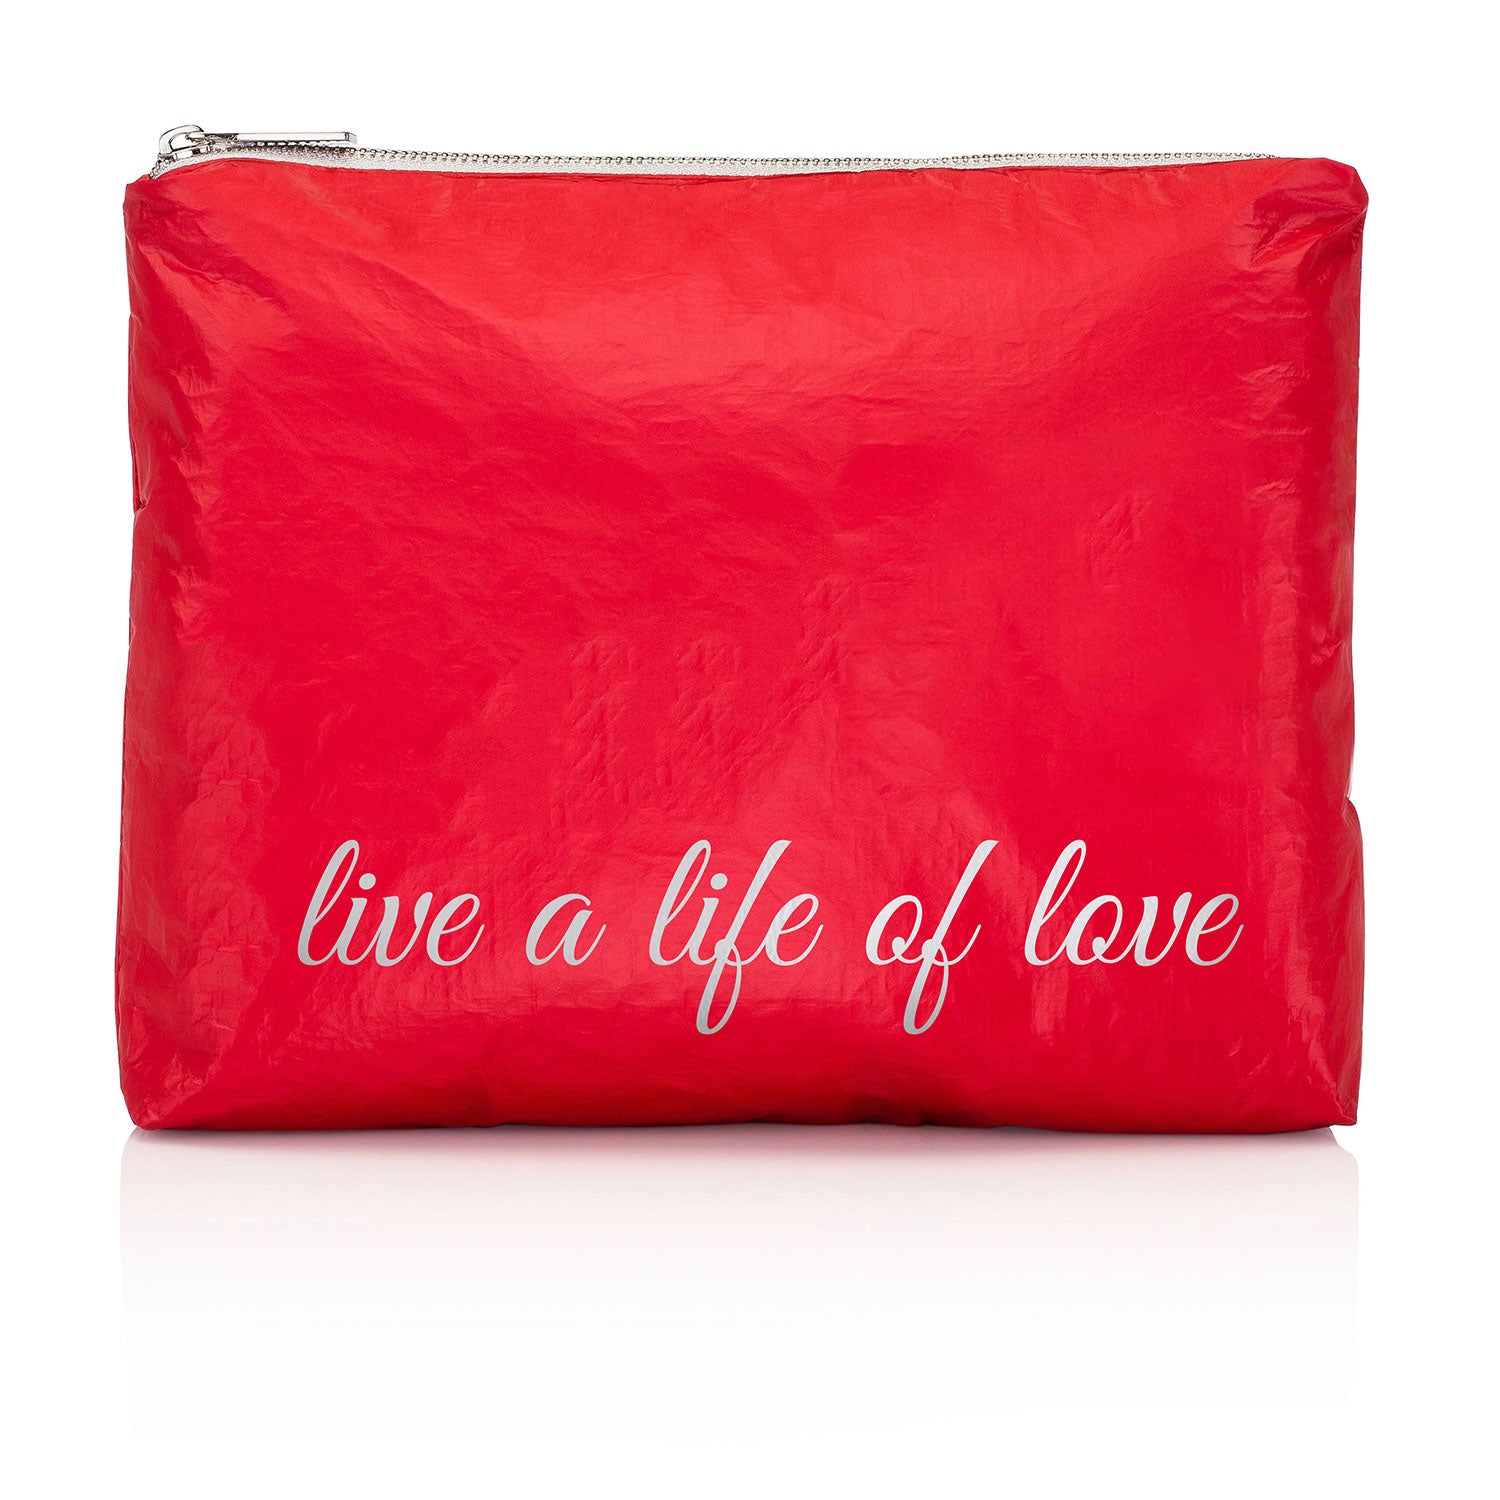 Makeup Pouch - Travel Pack - Medium Pack - Chili Pepper Red with Metallic Silver "Live a Life of LOVE"